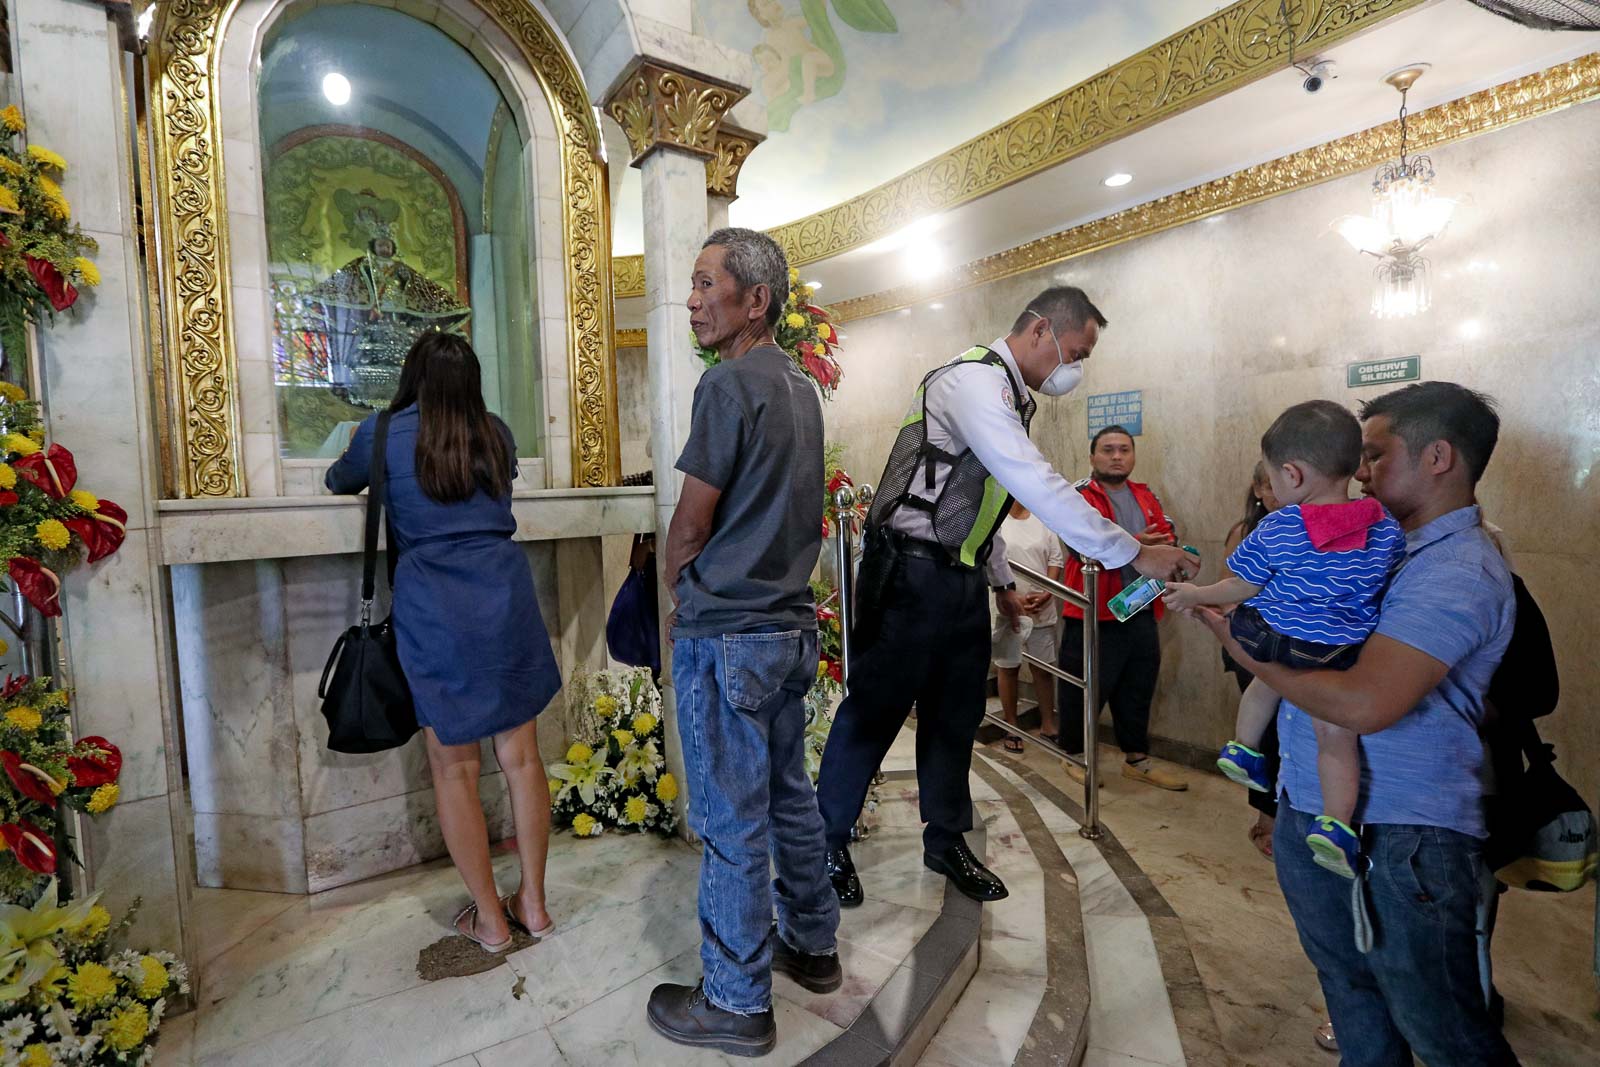 DISINFECTION. The Basilica Minore del Sto Niño management facilitates disinfection on March 12, 2020, as part of precautionary measures for churchgoers against COVID-19. File photo by Gelo Litonjua/Rappler  